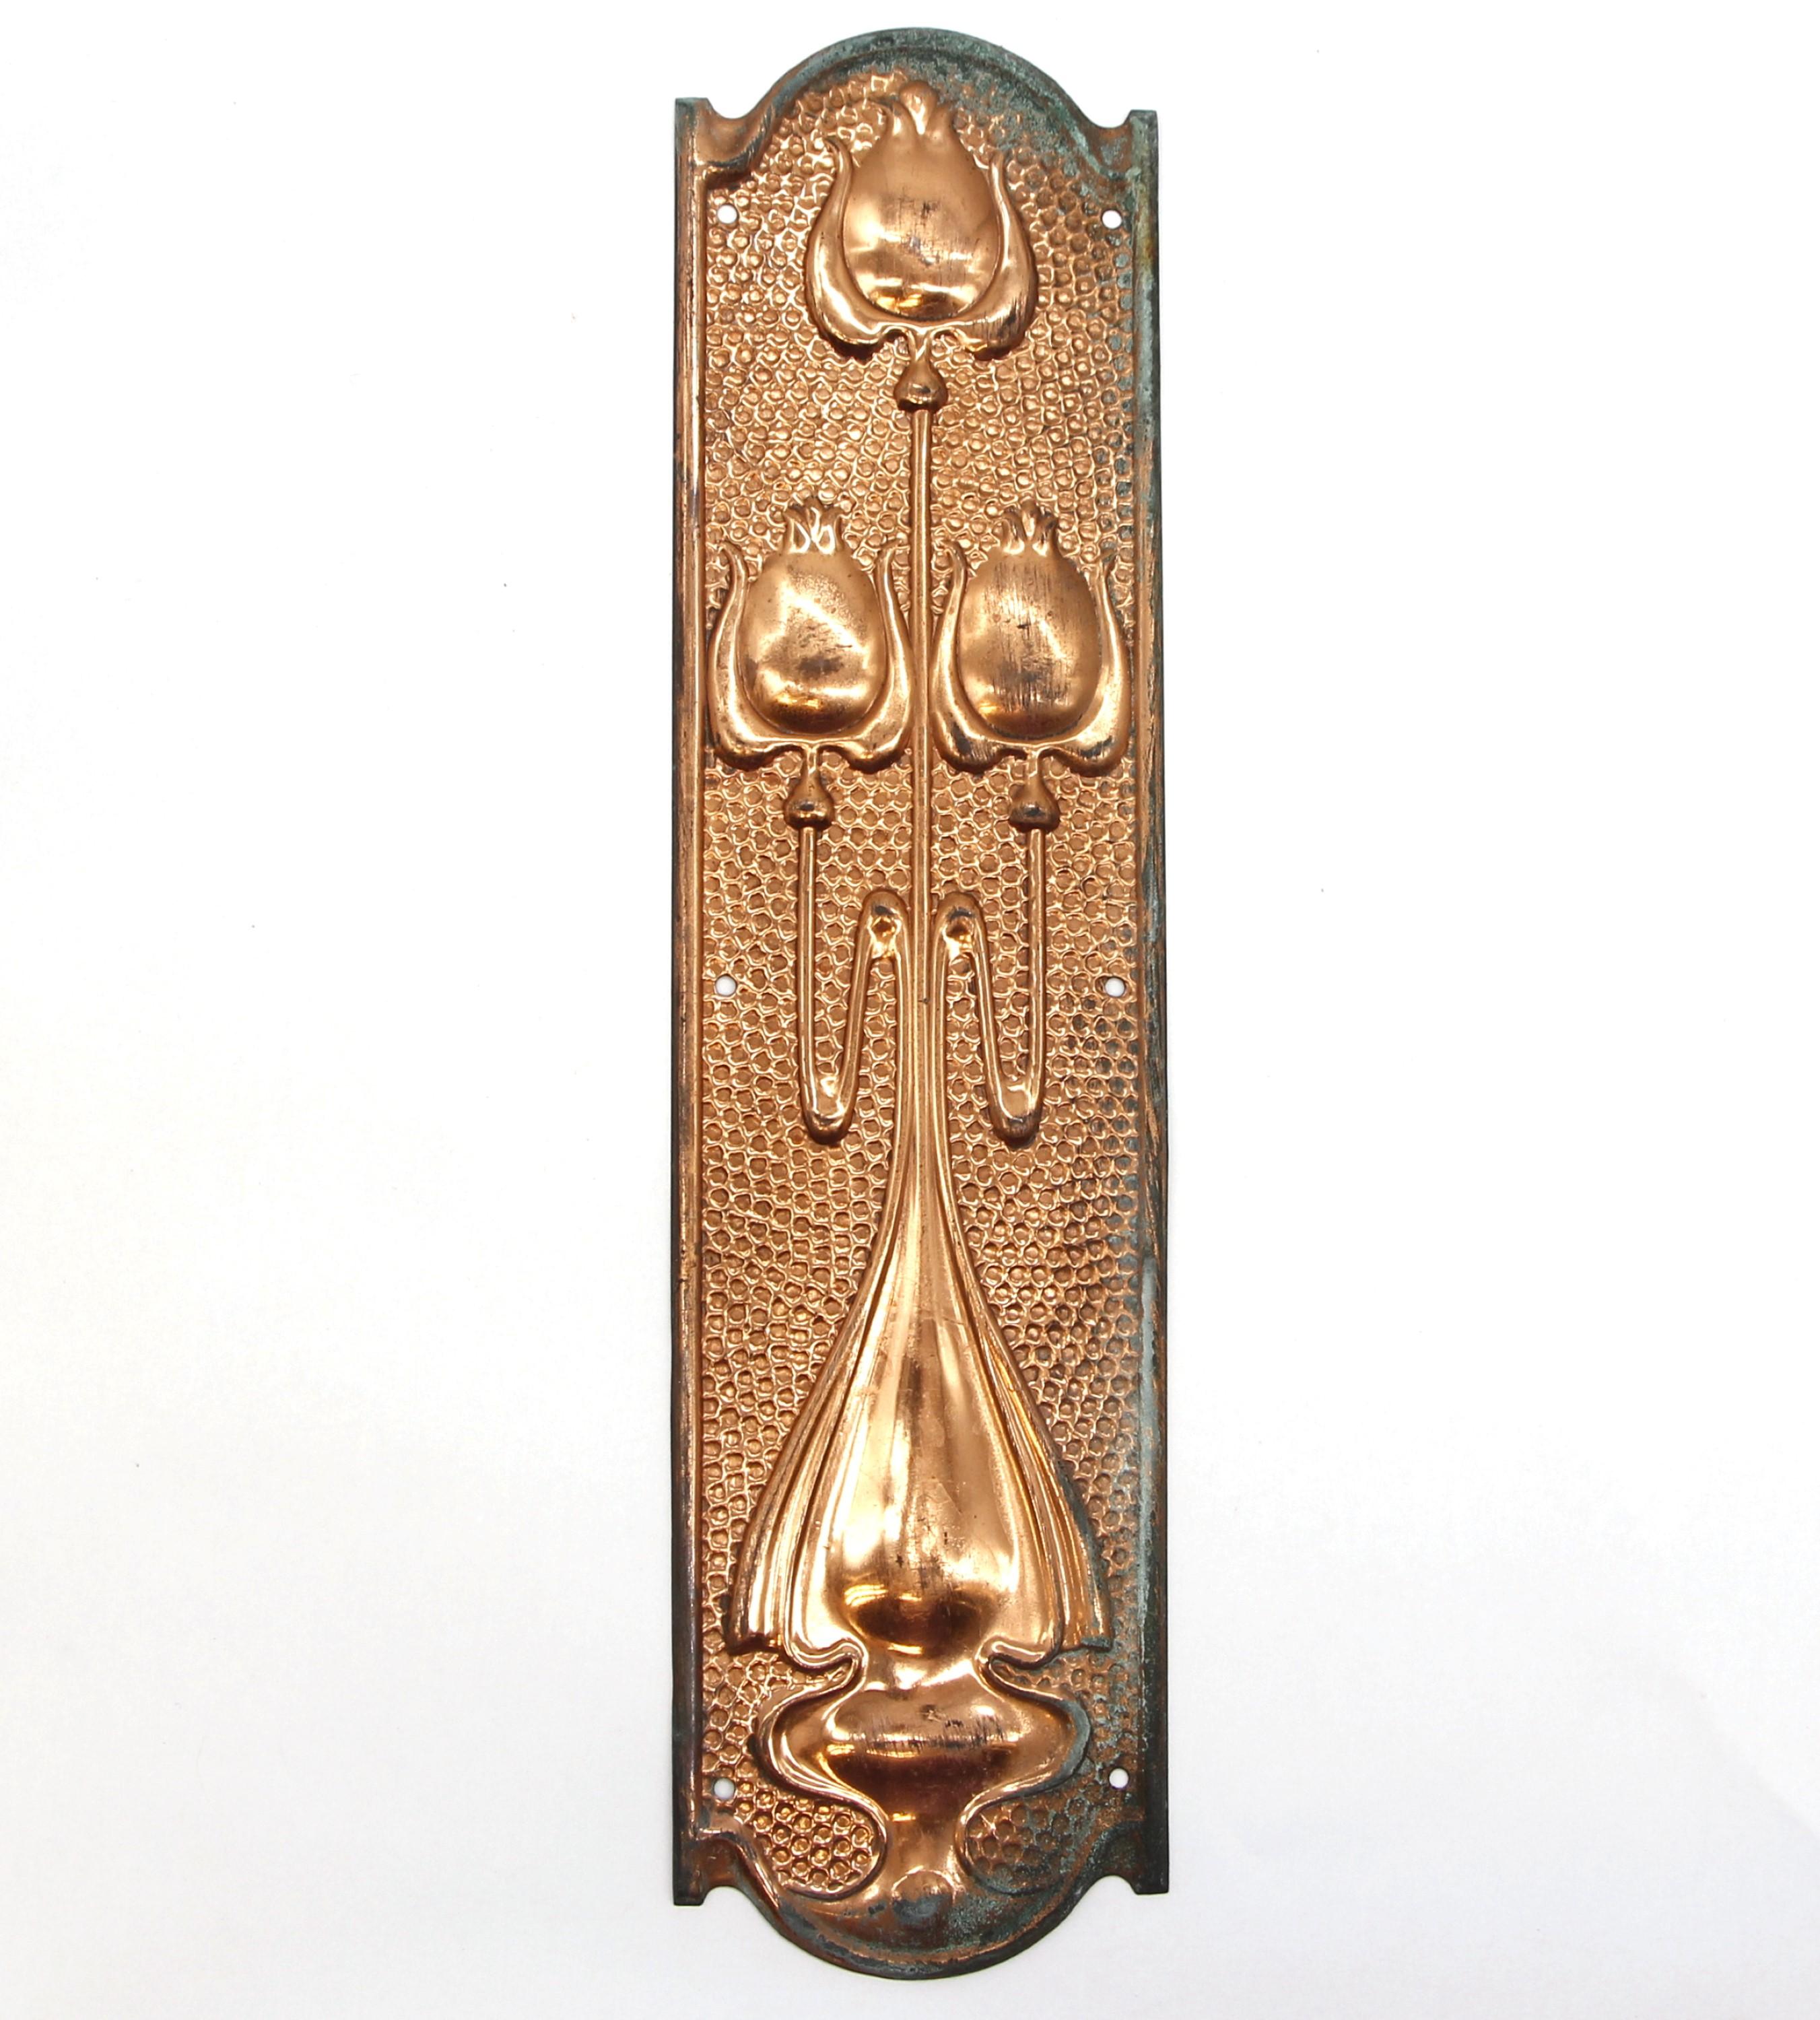 These copper plated brass push plates with a hammered Art Nouveau design showcase tulip designs and add a touch of elegance to doors. They are in good condition, with some surface wear. Priced as a pair. Please note, this item is located in our